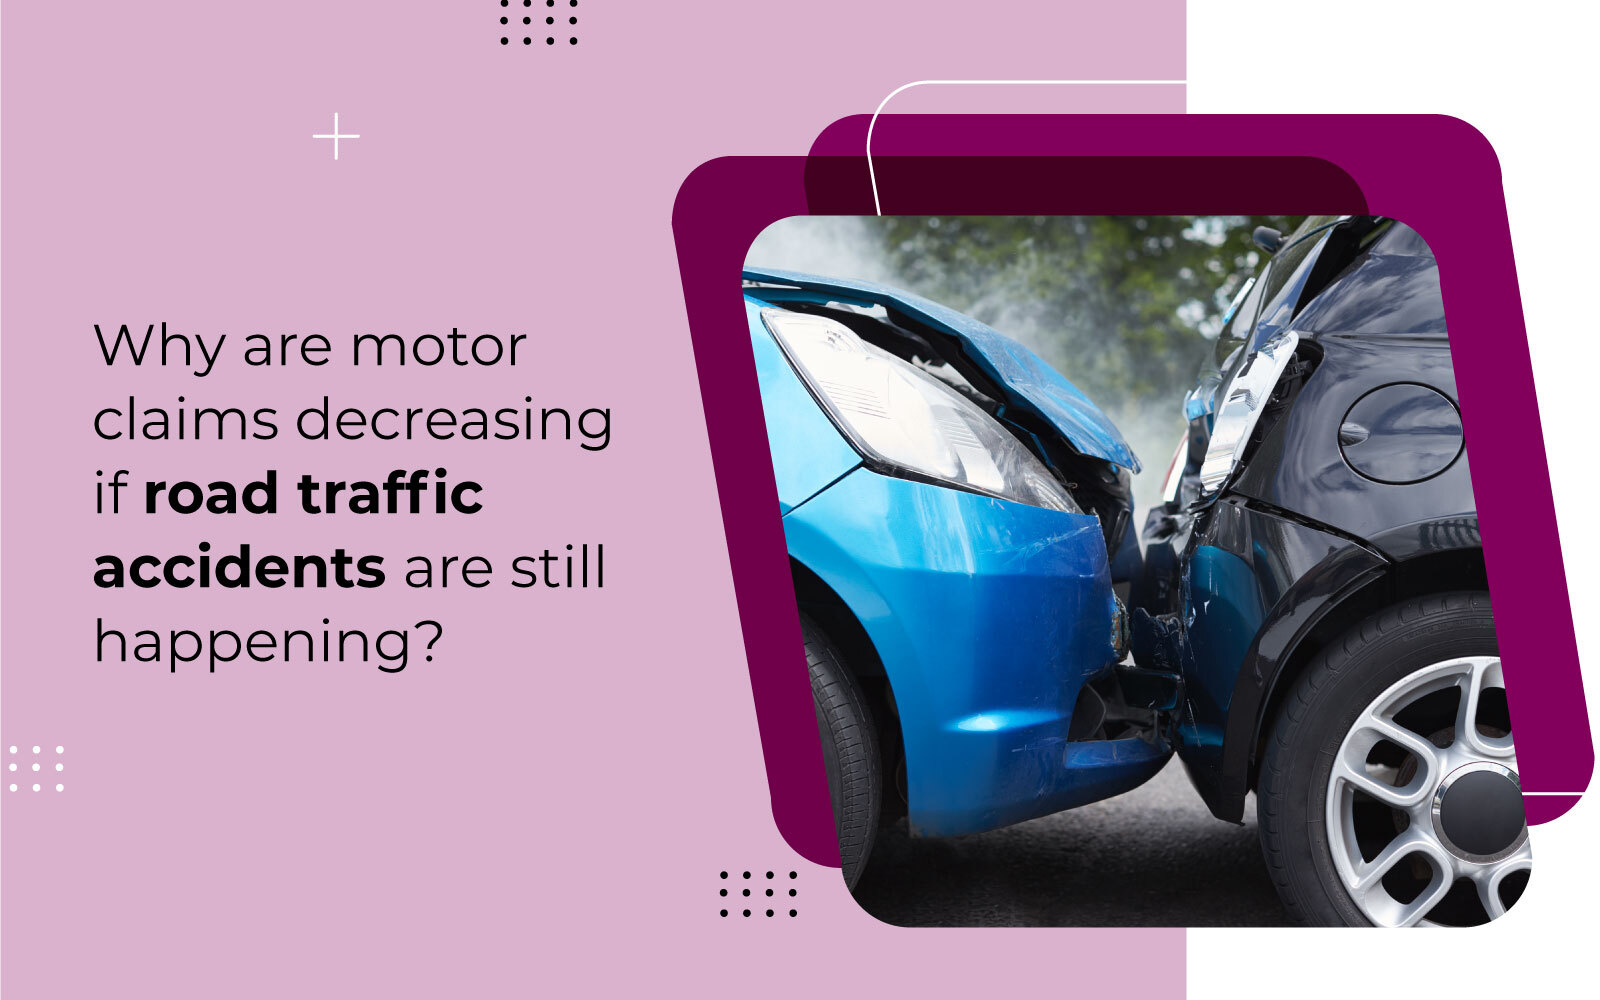 Why are motor claims decreasing if road traffic accidents are still happening?